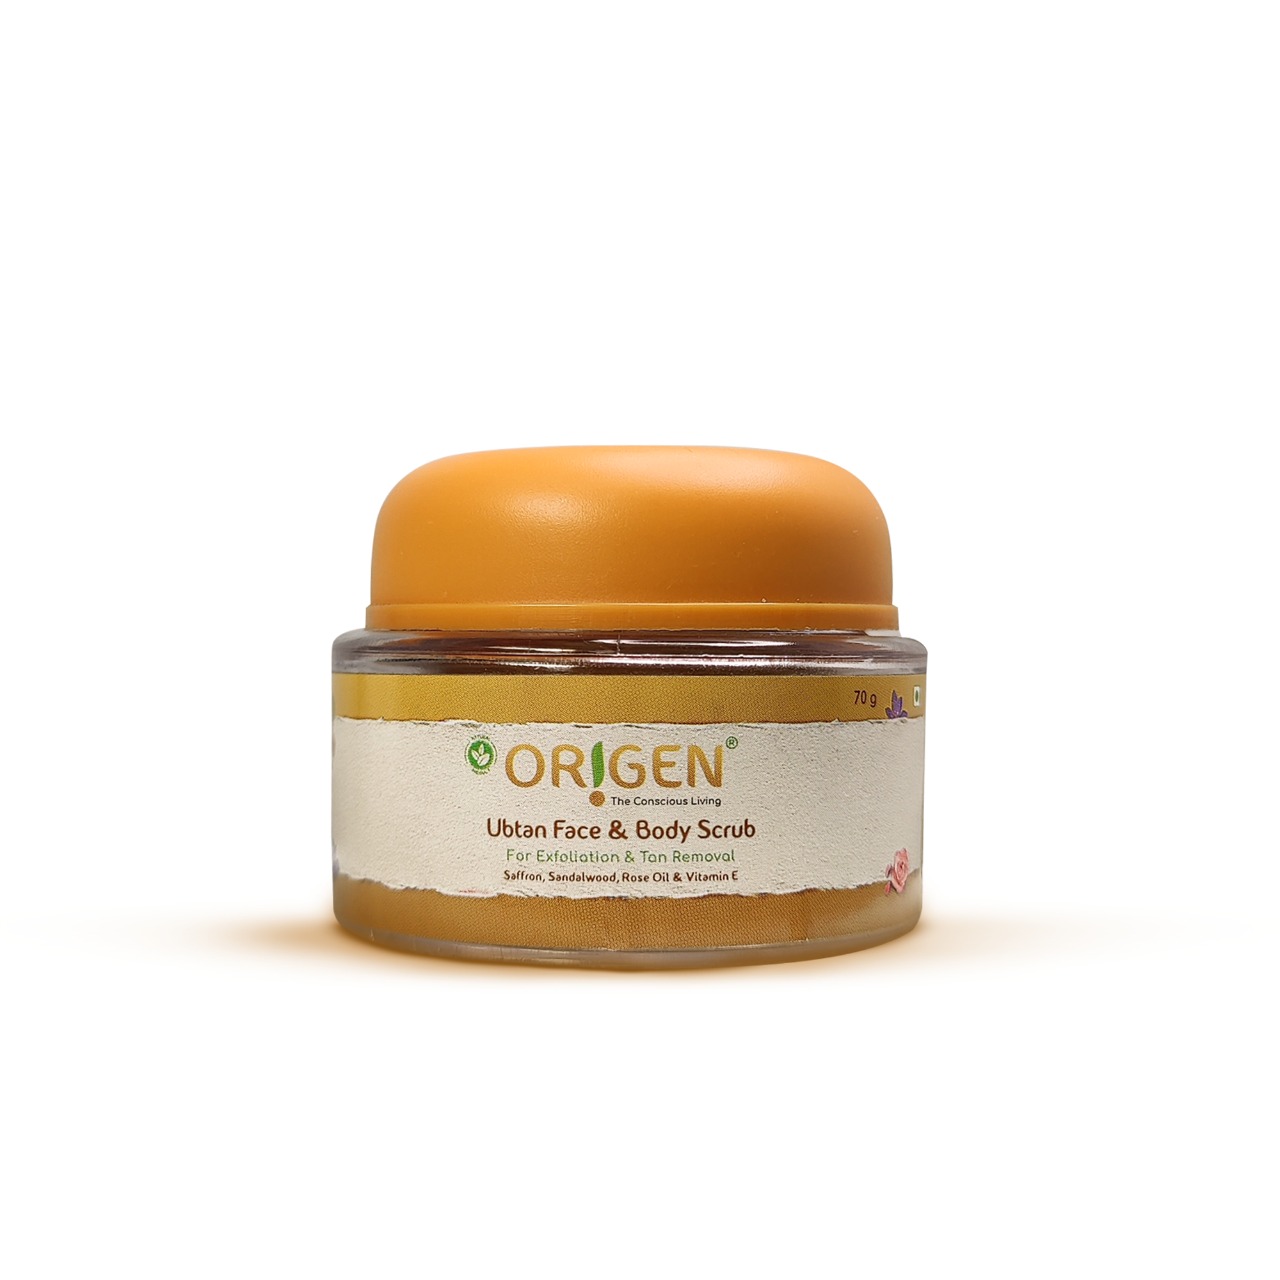 Origen Daily Use Ubtan Face & Body Scrub | Removes Tan & Prevents Hyperpigmentation | Ayurvedic & Naturally Crafted (70g)